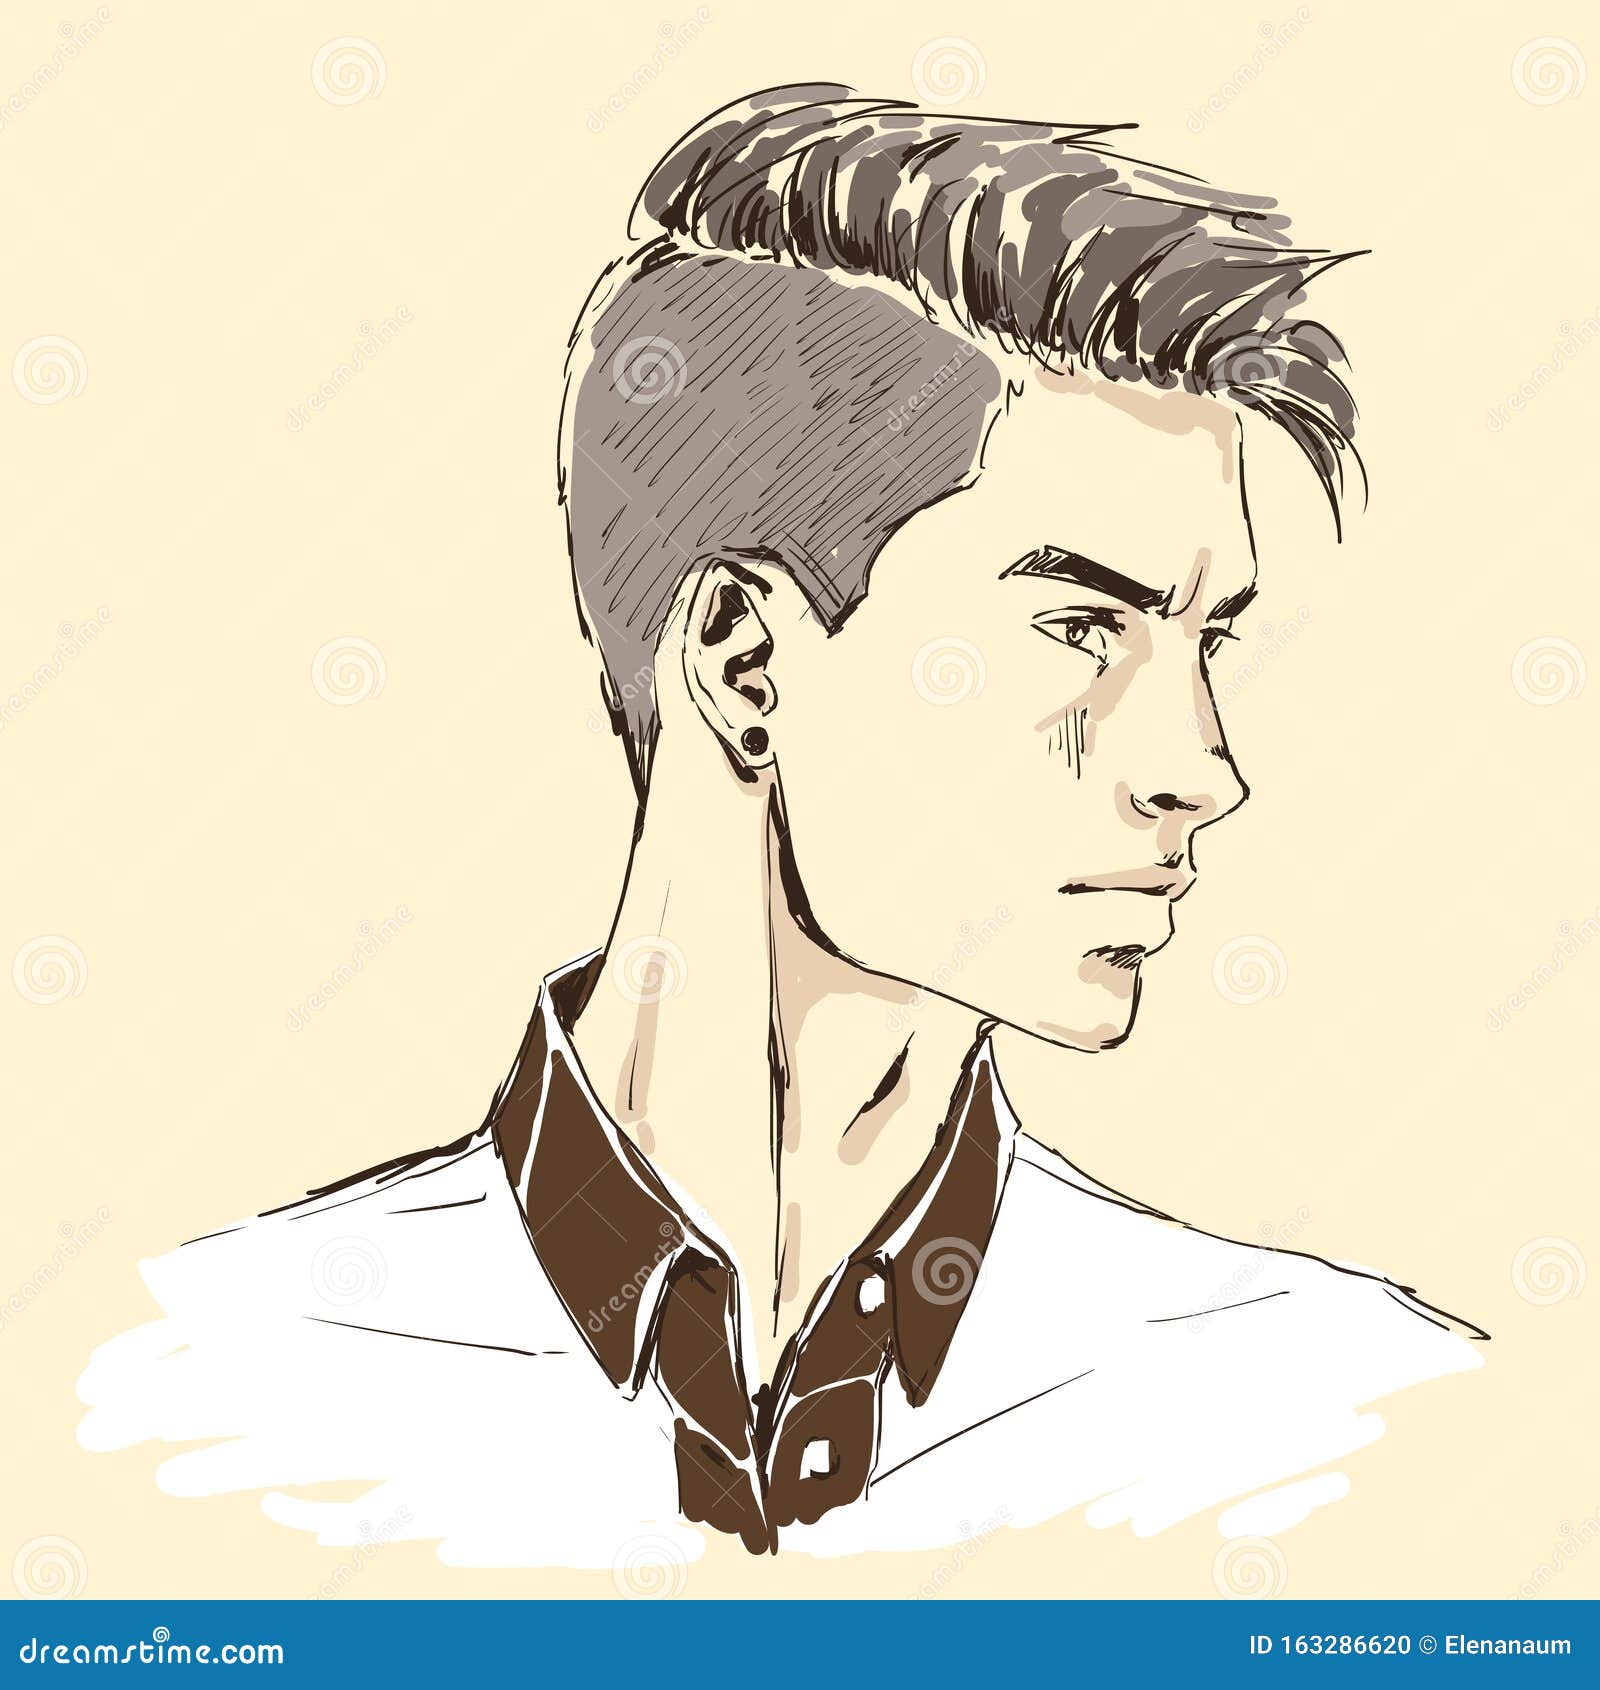 AI Image Generator: Realistic line-drawing, portrait of a handsome young man